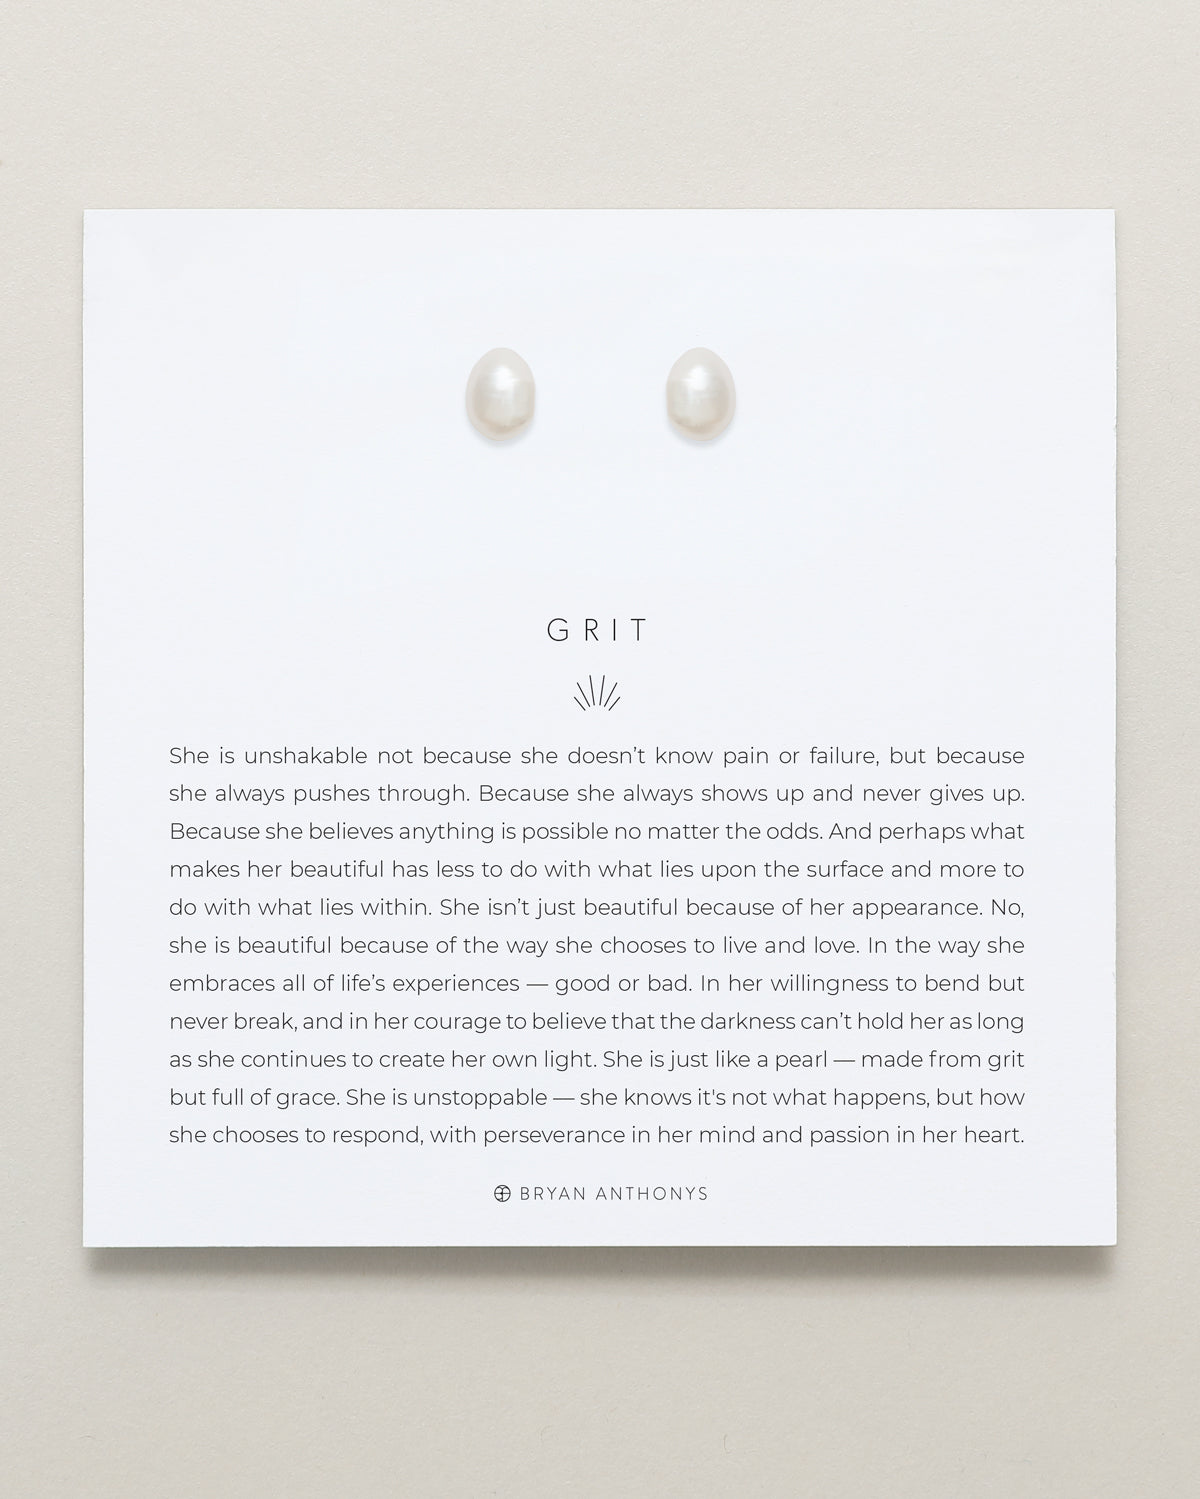  Bryan Anthonys Grit Bold Stud Earrings On Card